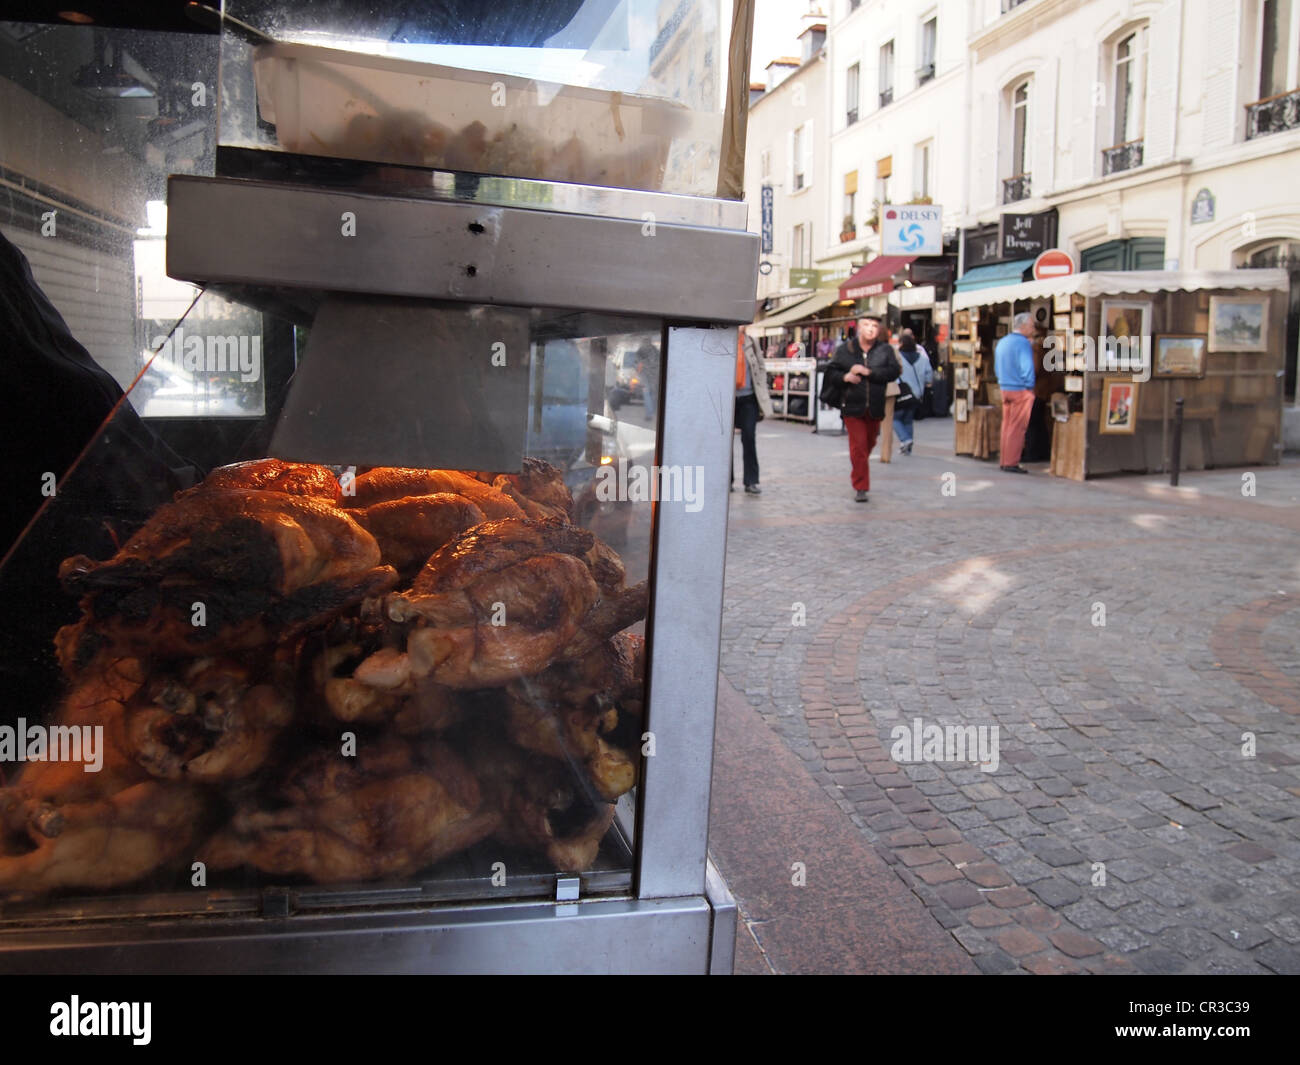 Roasted chickens for sale at a shop on Rue Cler, Paris, France, May 13, 2012, © Katharine Andriotis Stock Photo